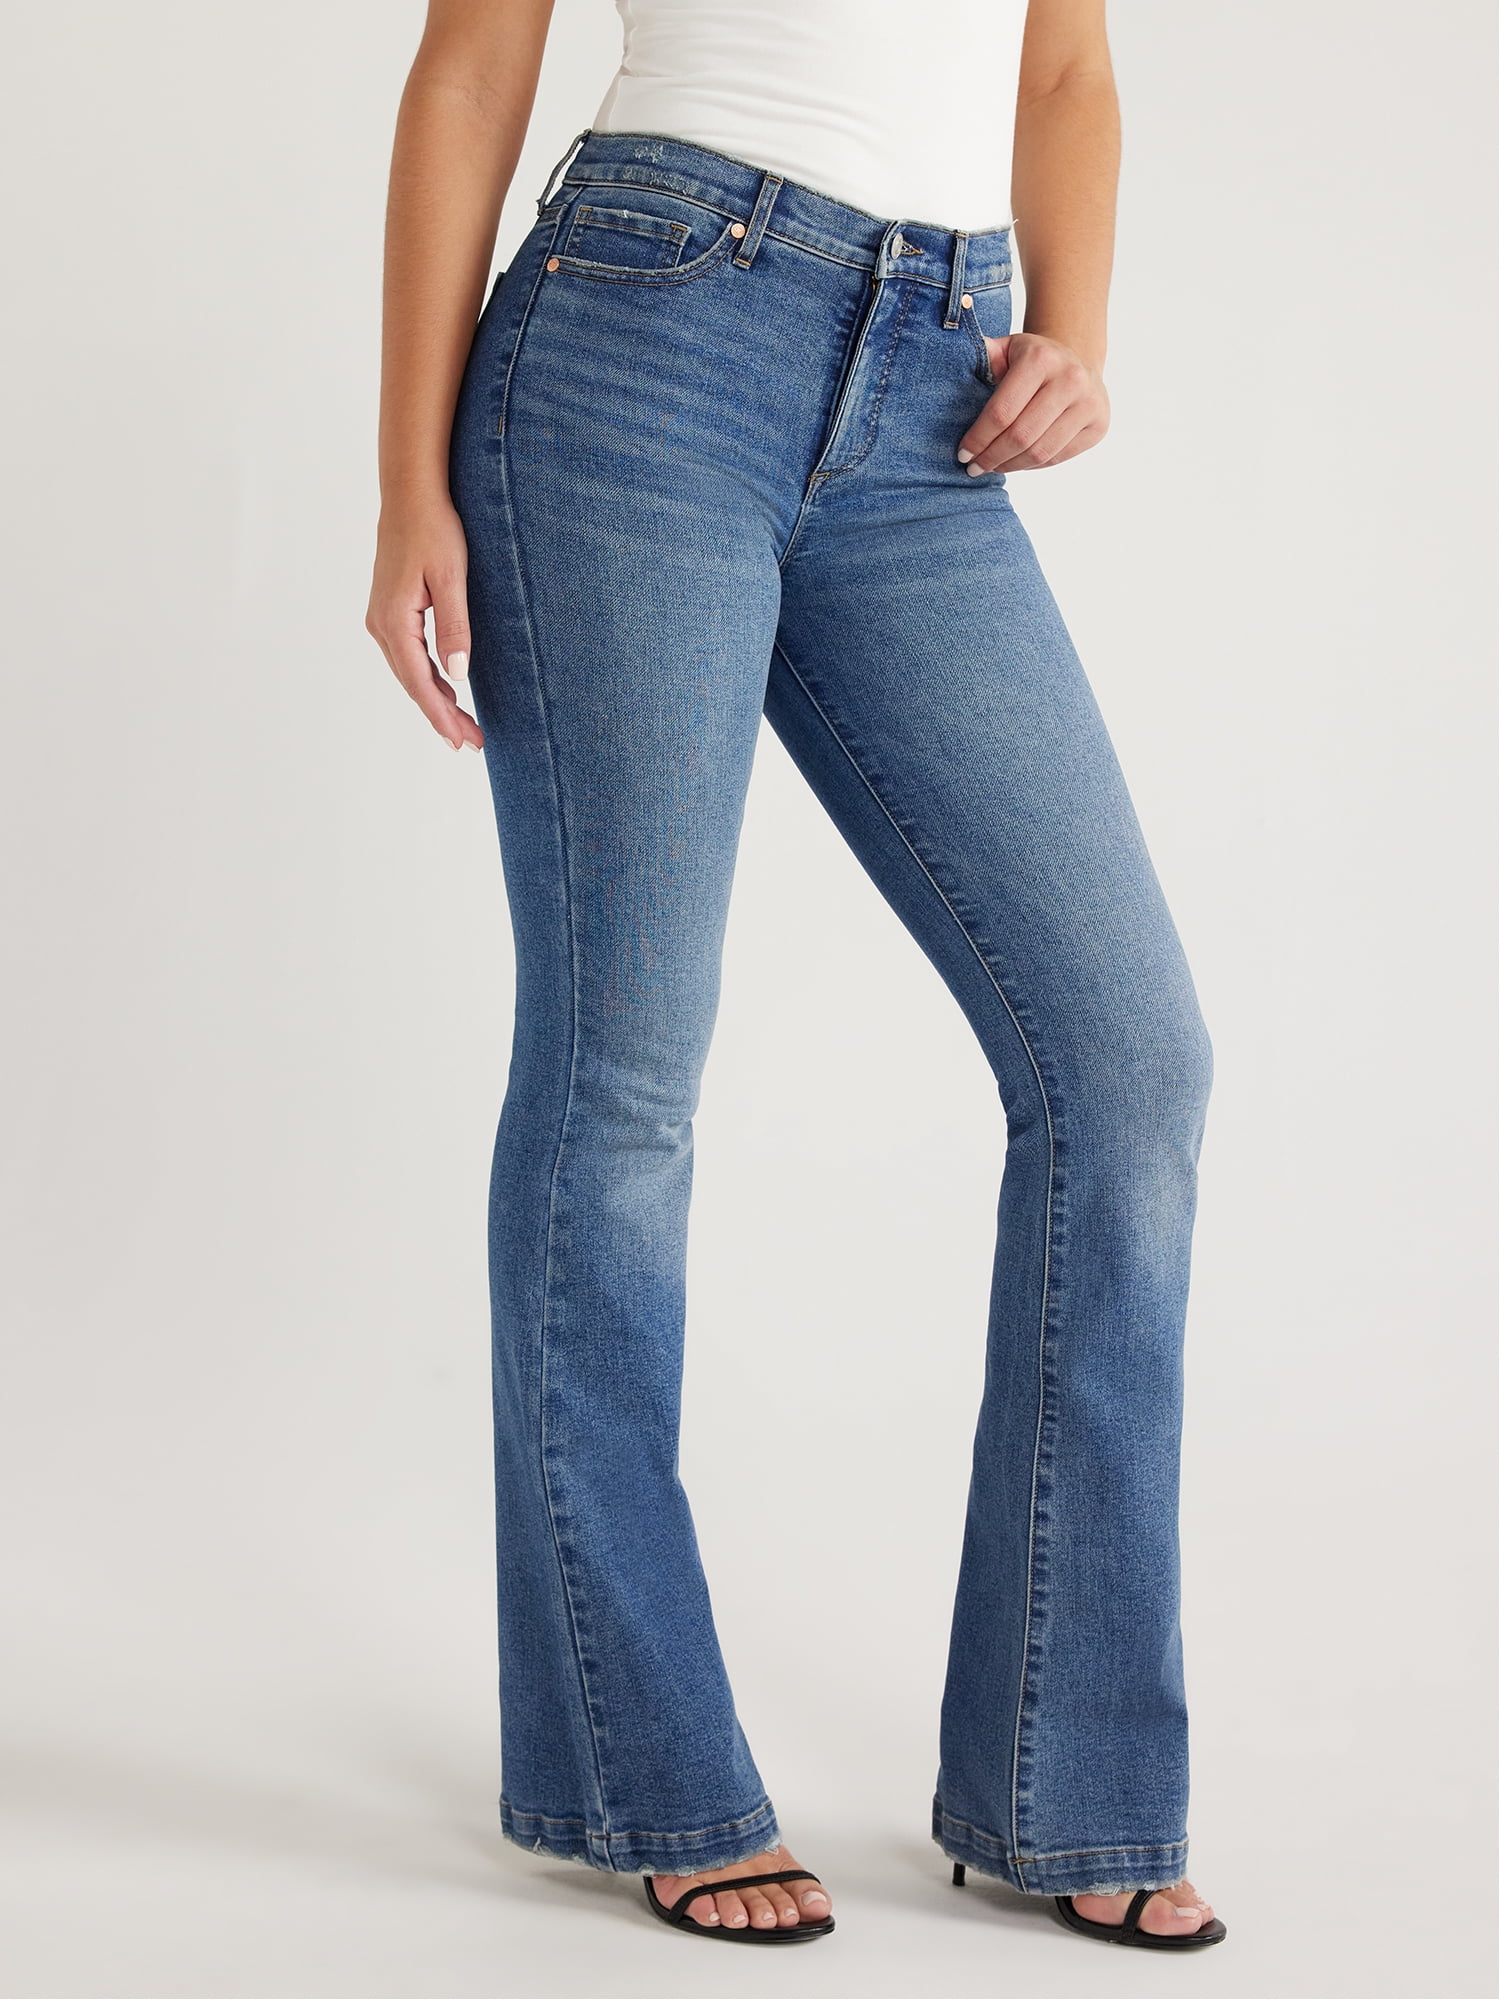 Sofia Jeans Women's and Women's Plus Melissa Flare High Rise Jeans ...